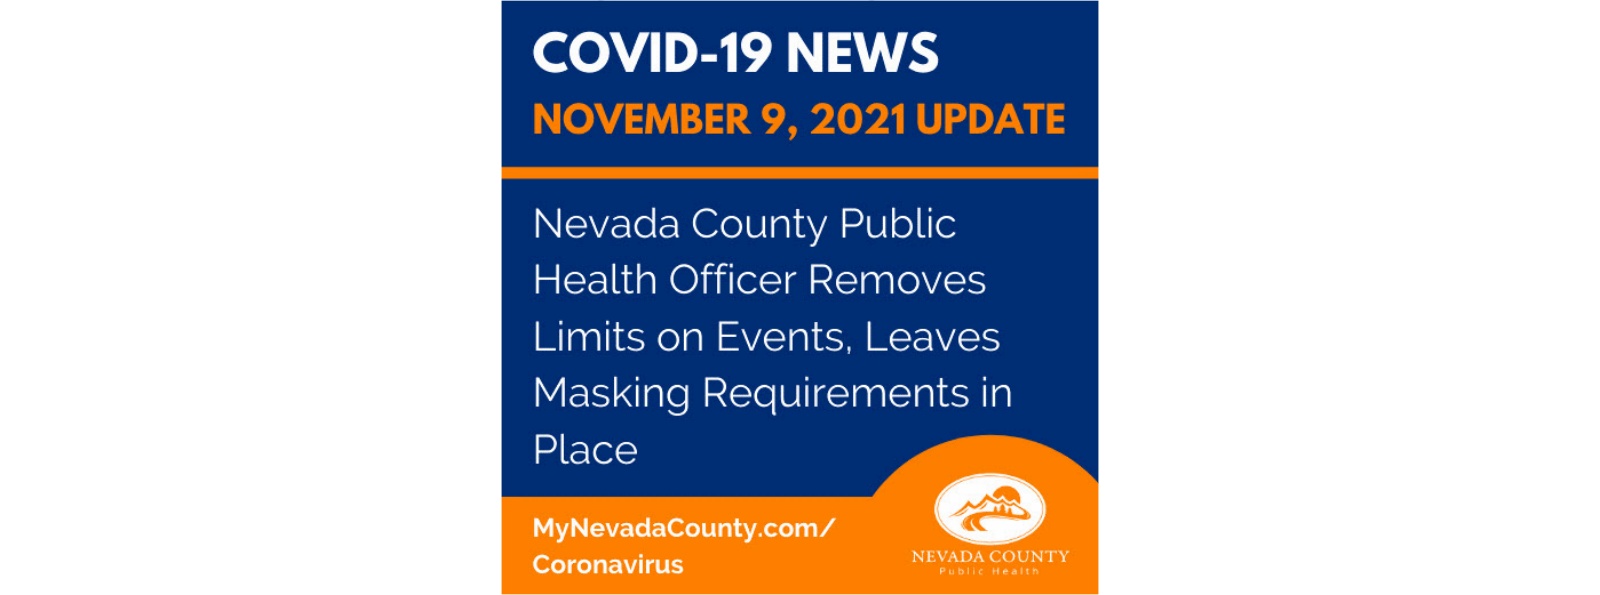 Nevada County Public Health Removes Limits on Events, Masking Requirements Still in Place